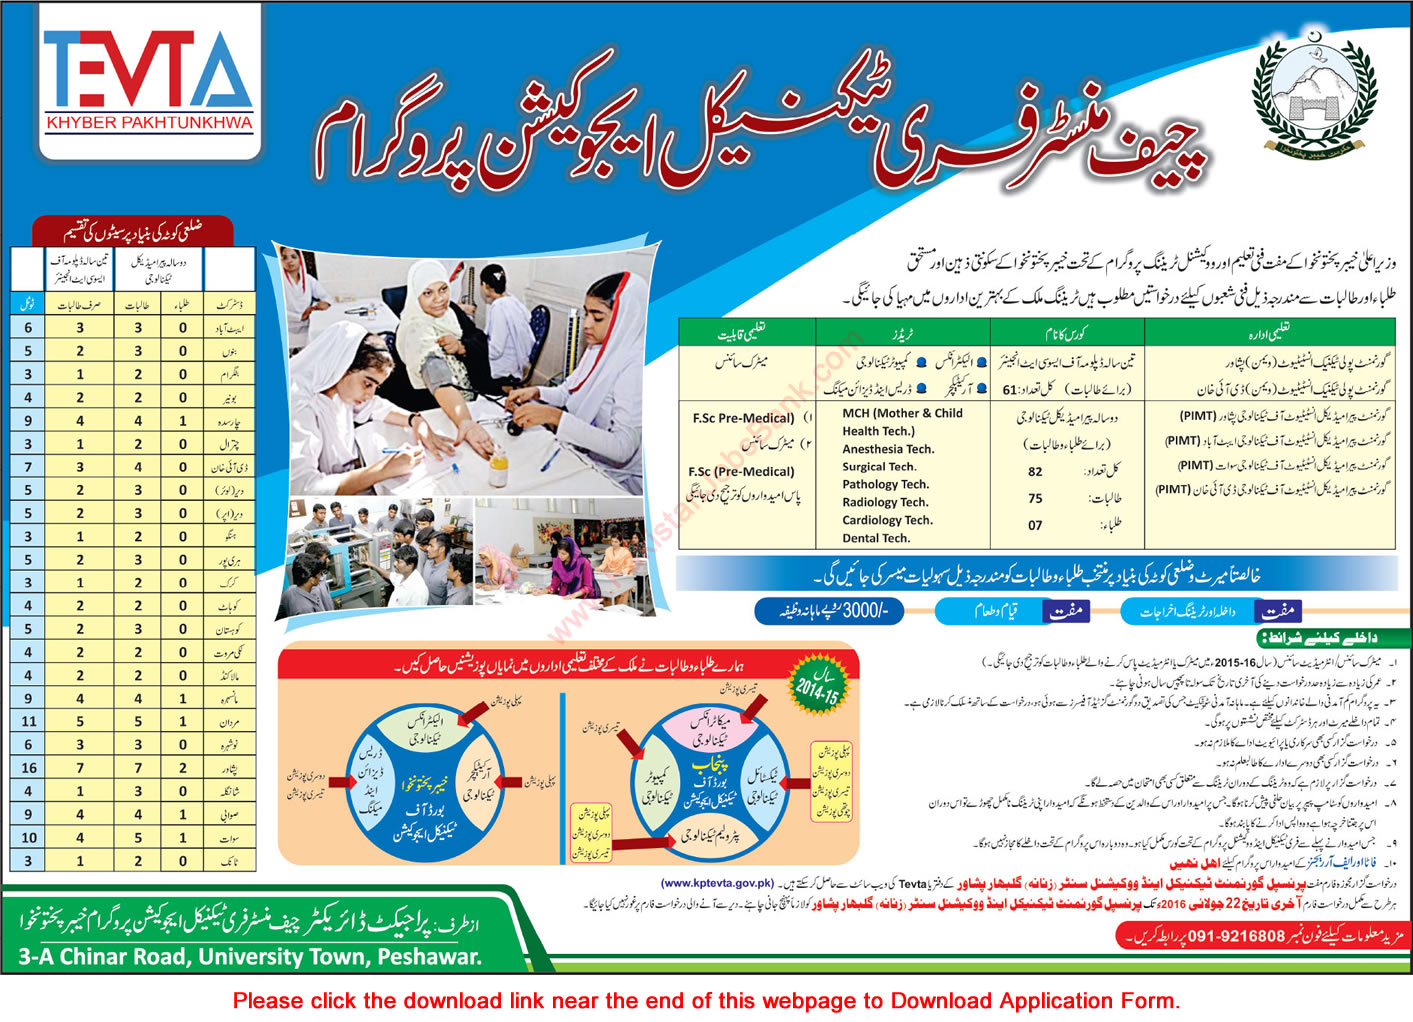 TEVTA Free Courses in KPK 2016 July Application Form Chief Minister's Free Technical Education Program Latest